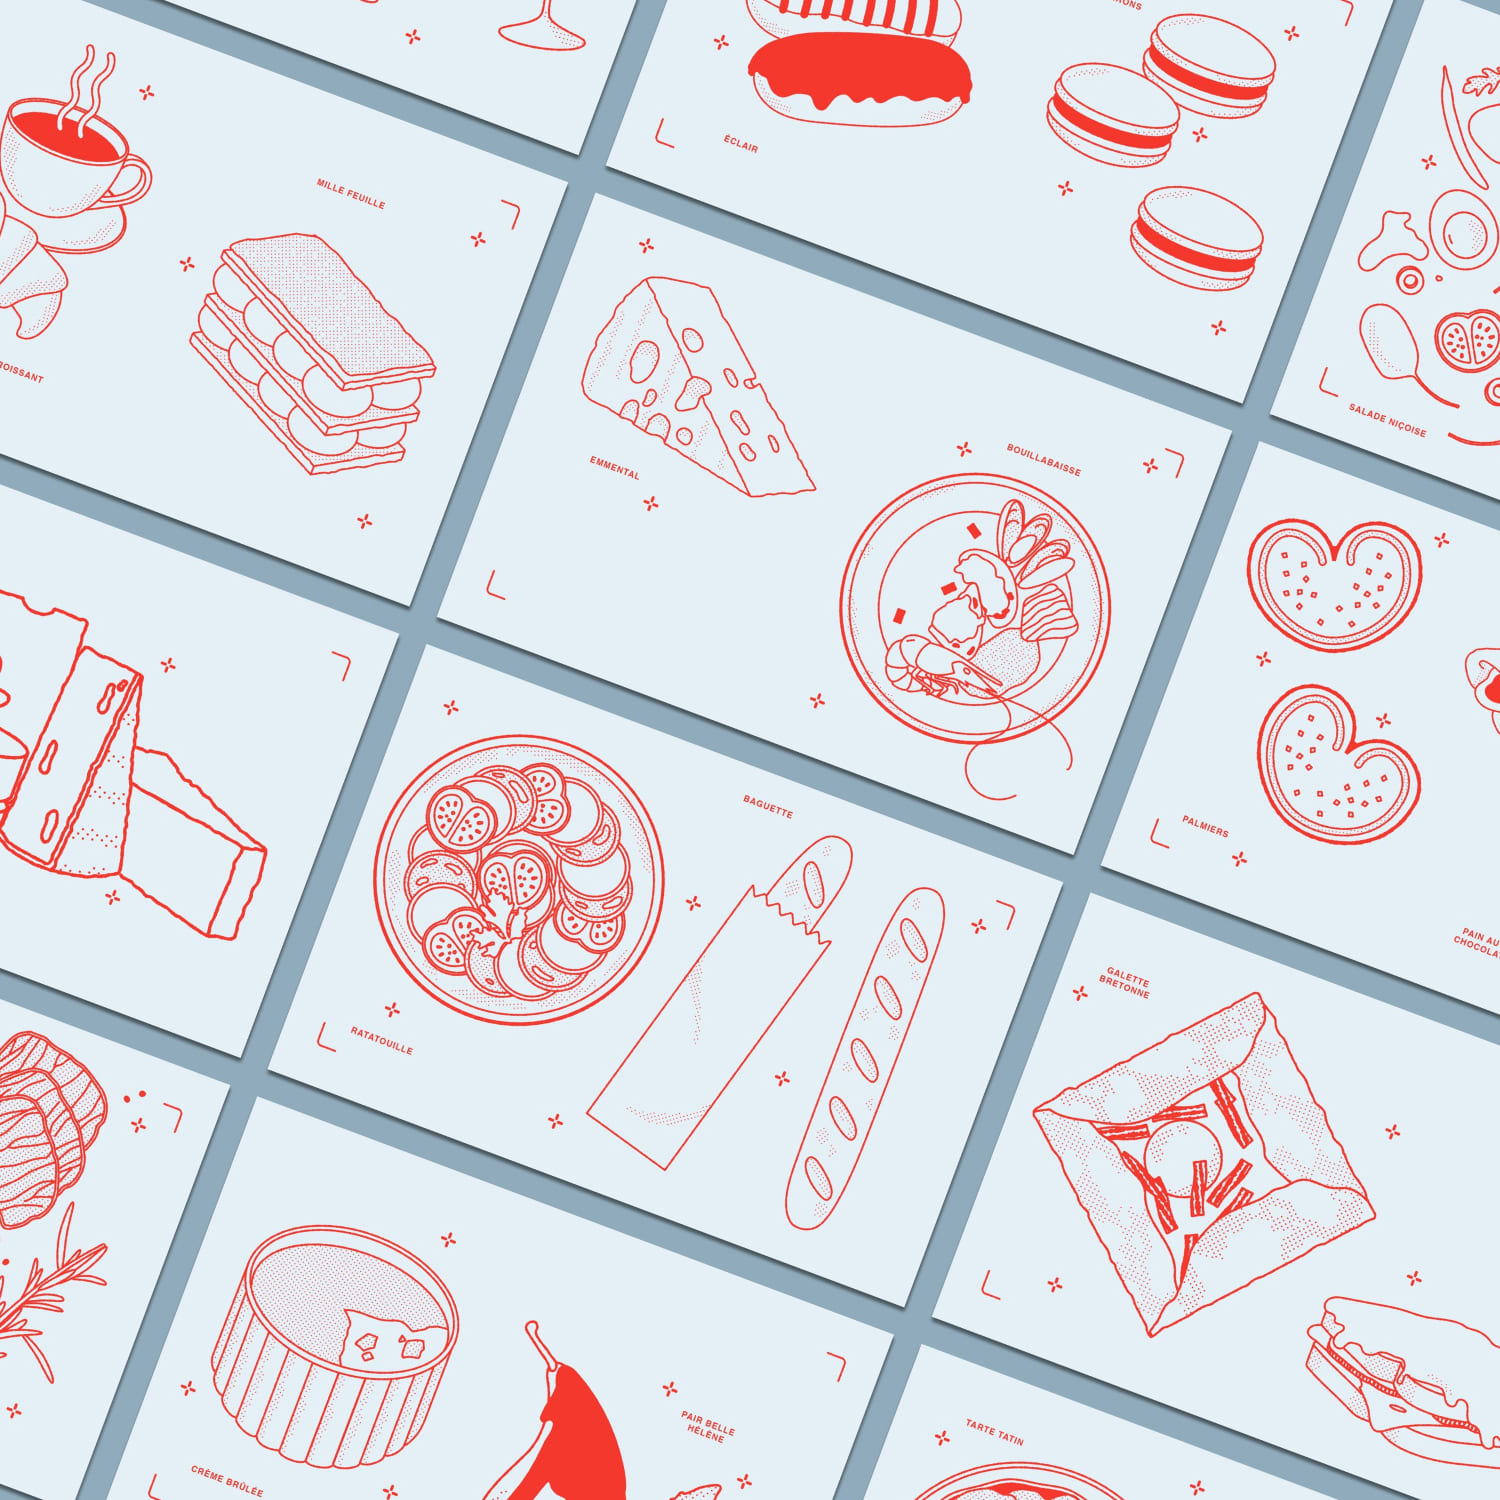 French Food Vector Illustration created by GemPortella.